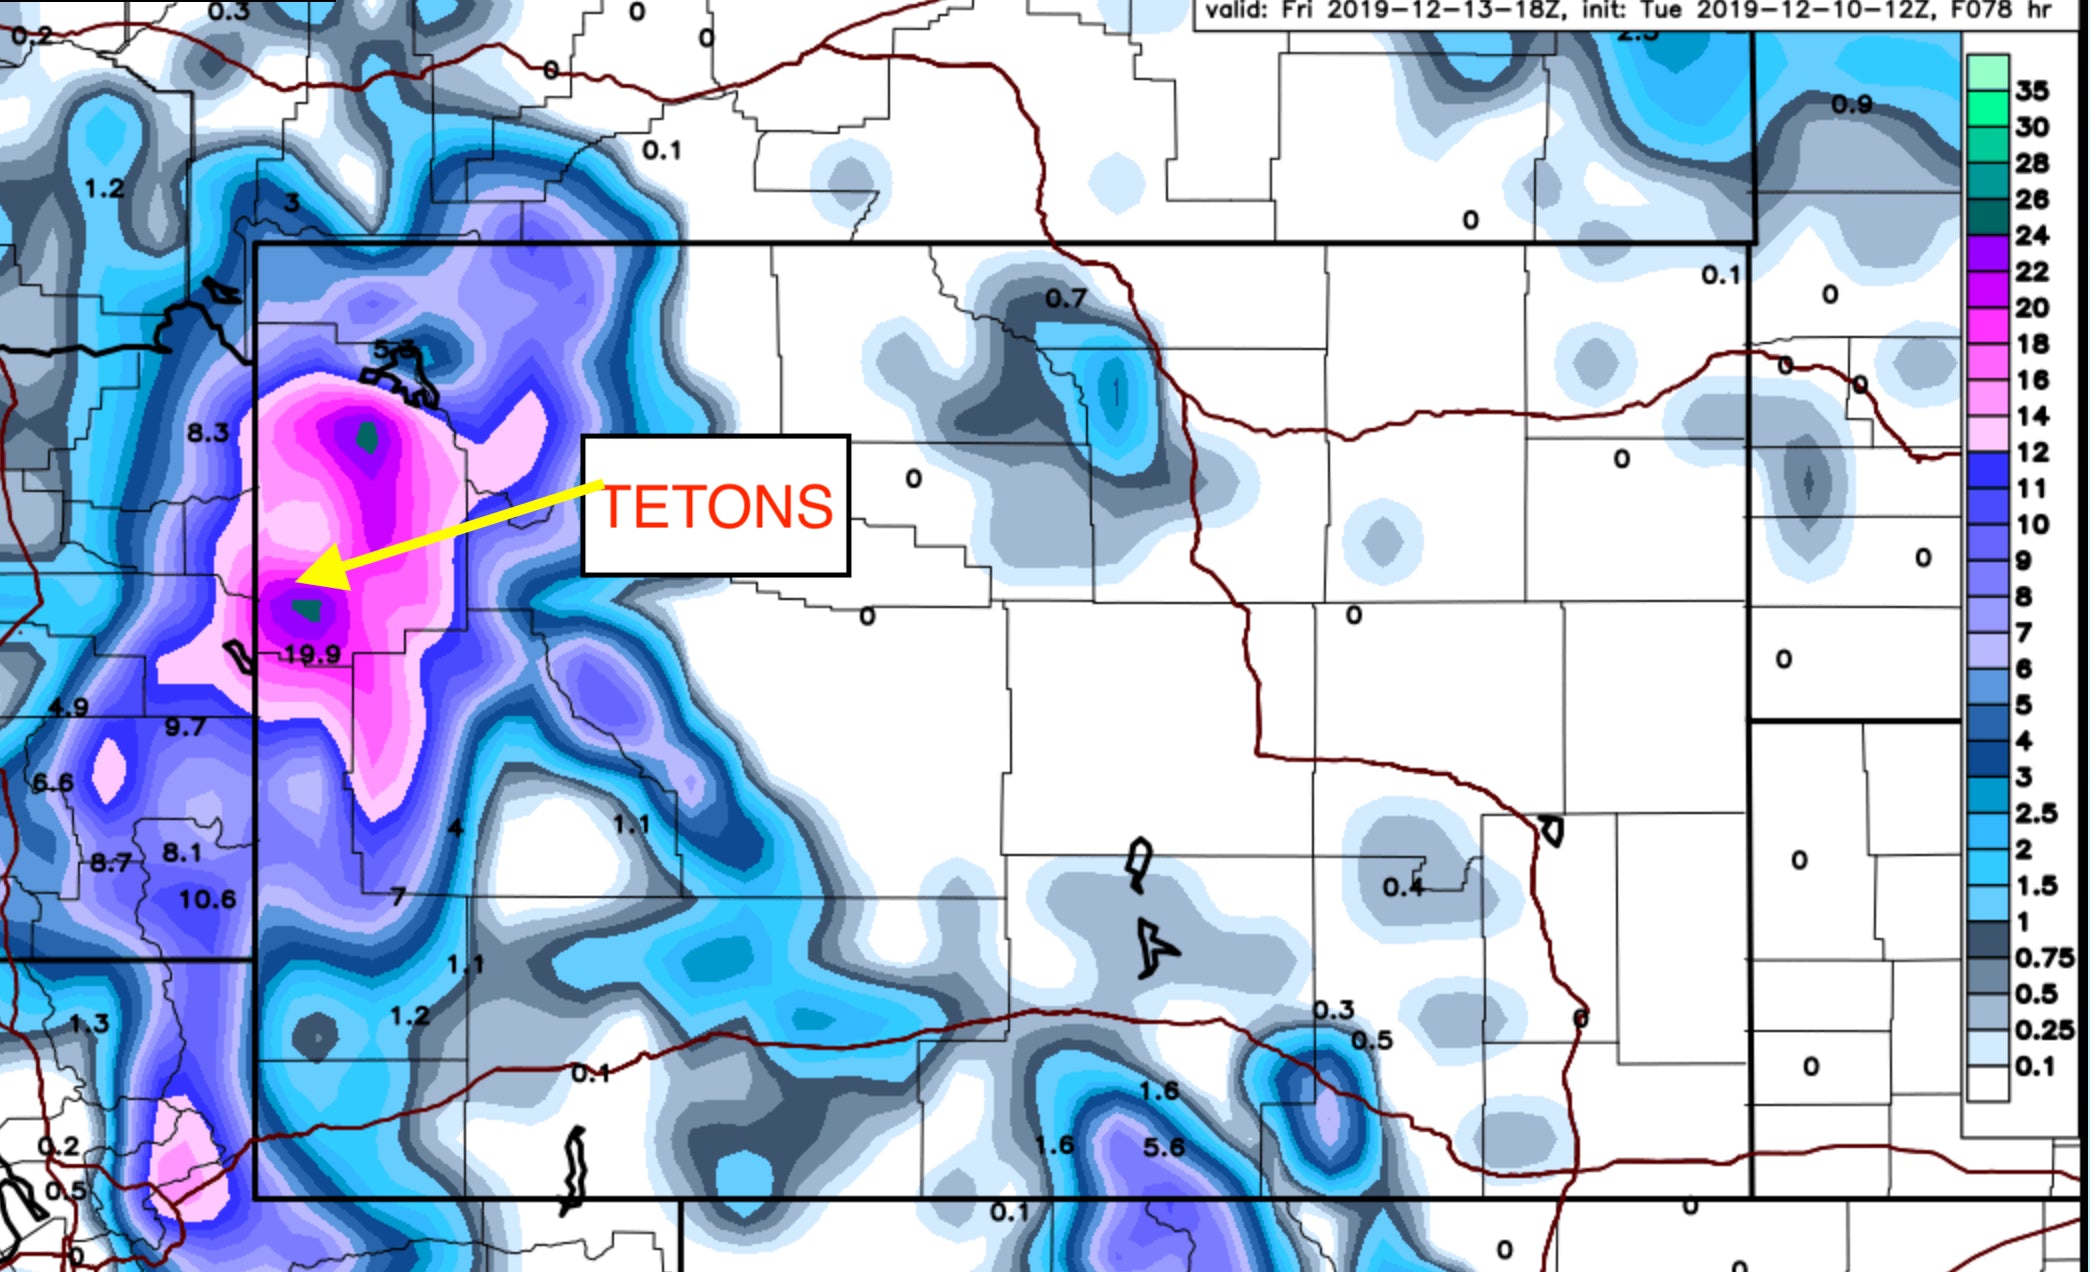 The Tetons are going to nab 11-18 inches plus from Thursday to Saturday. Teton specific forecast with increasing stoke for Wyoming.